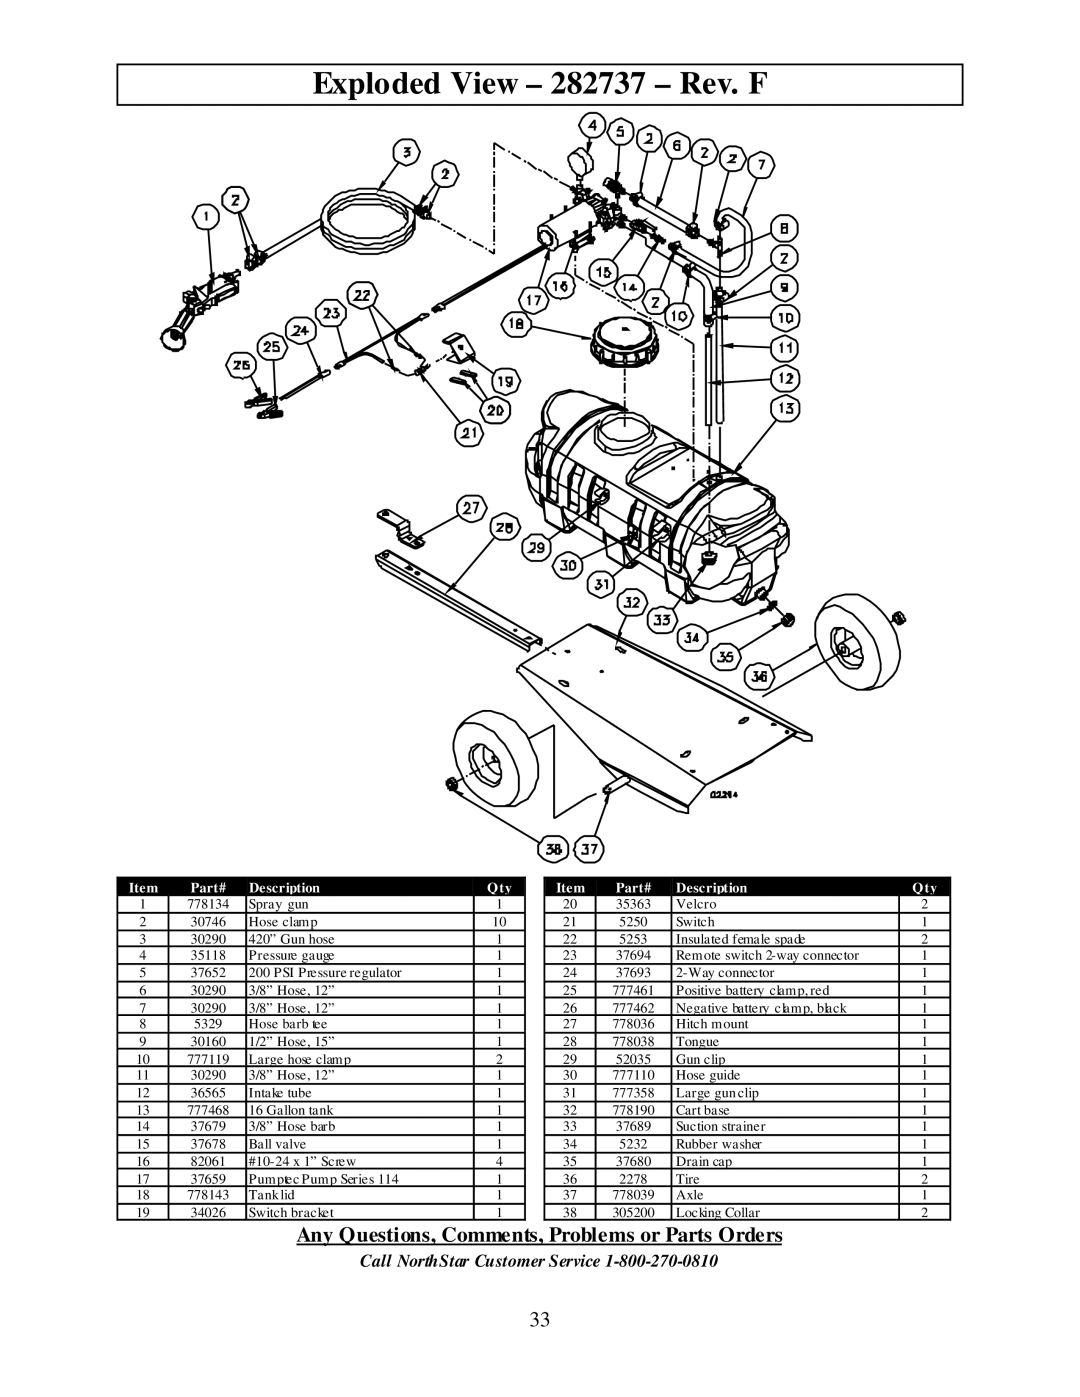 Panasonic M282737F owner manual Exploded View 282737 Rev. F, Any Questions, Comments, Problems or Parts Orders 